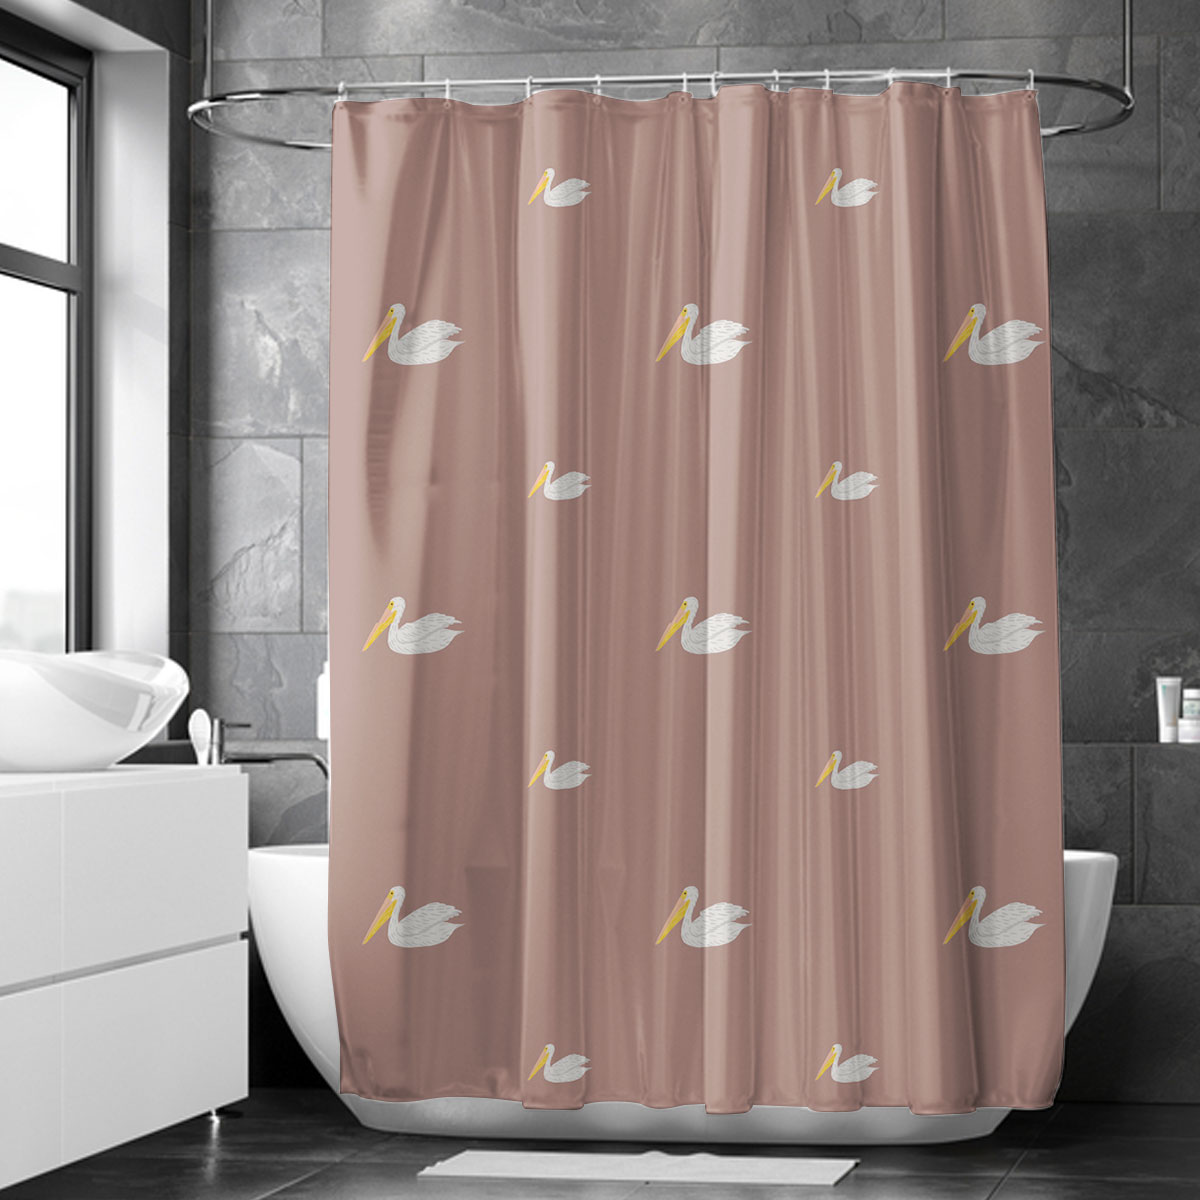 Big And Small Sitting Pelican Monogram Shower Curtain